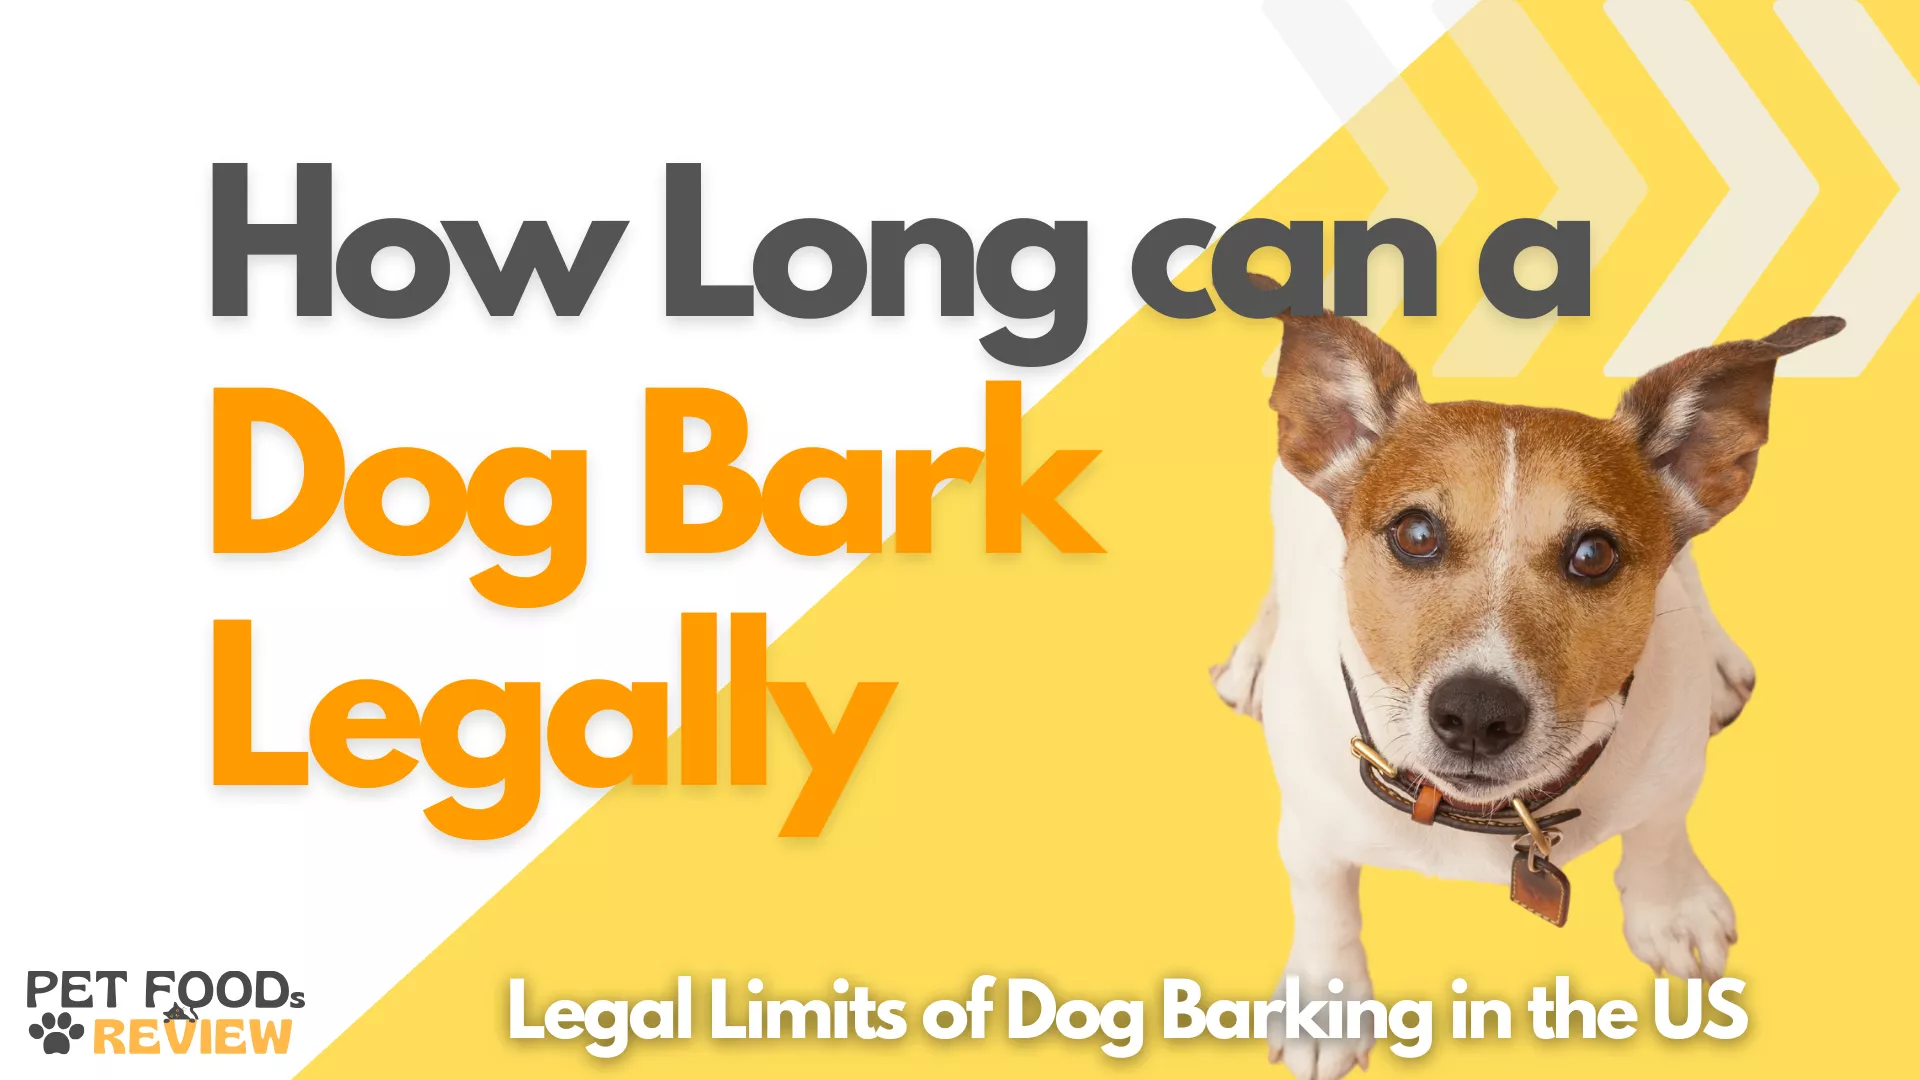 Understanding the Legal Limits of Dog Barking in the US